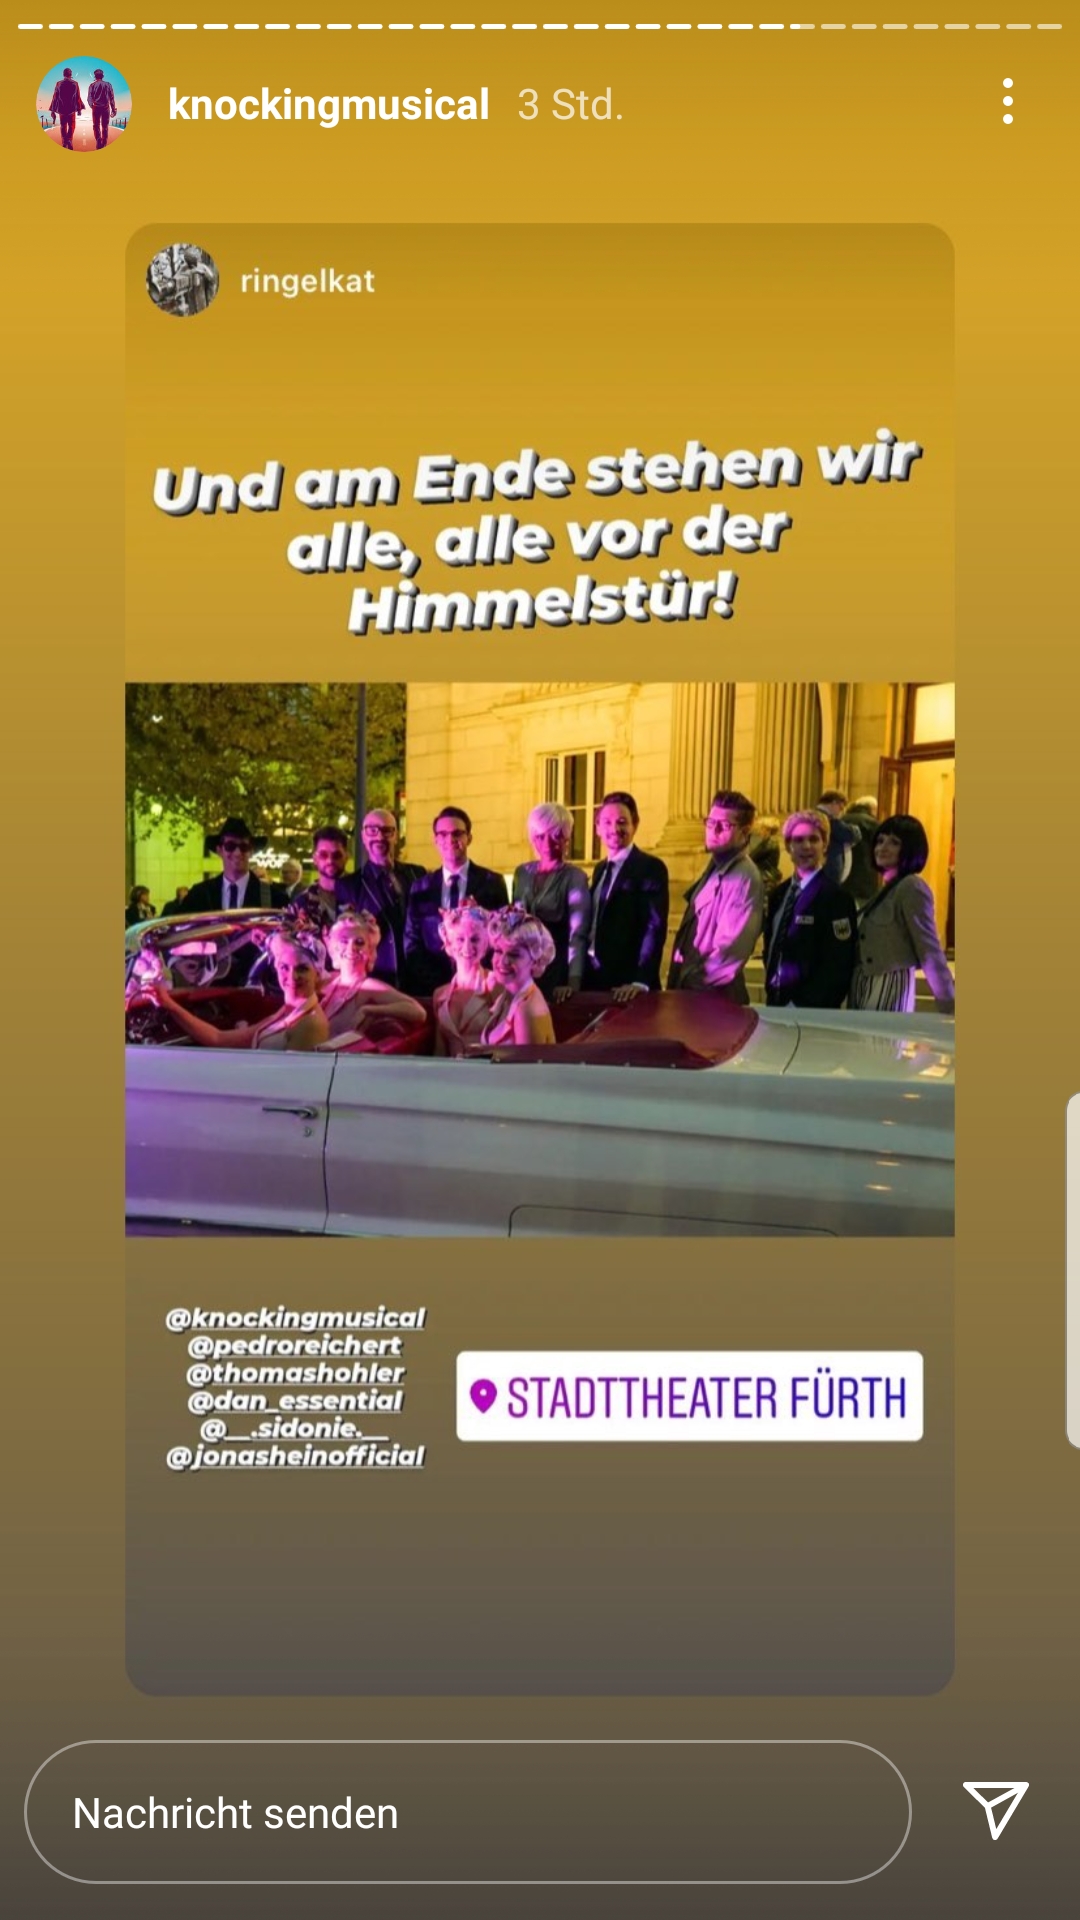 cctf-musical-premiere-fuerth-2021-009